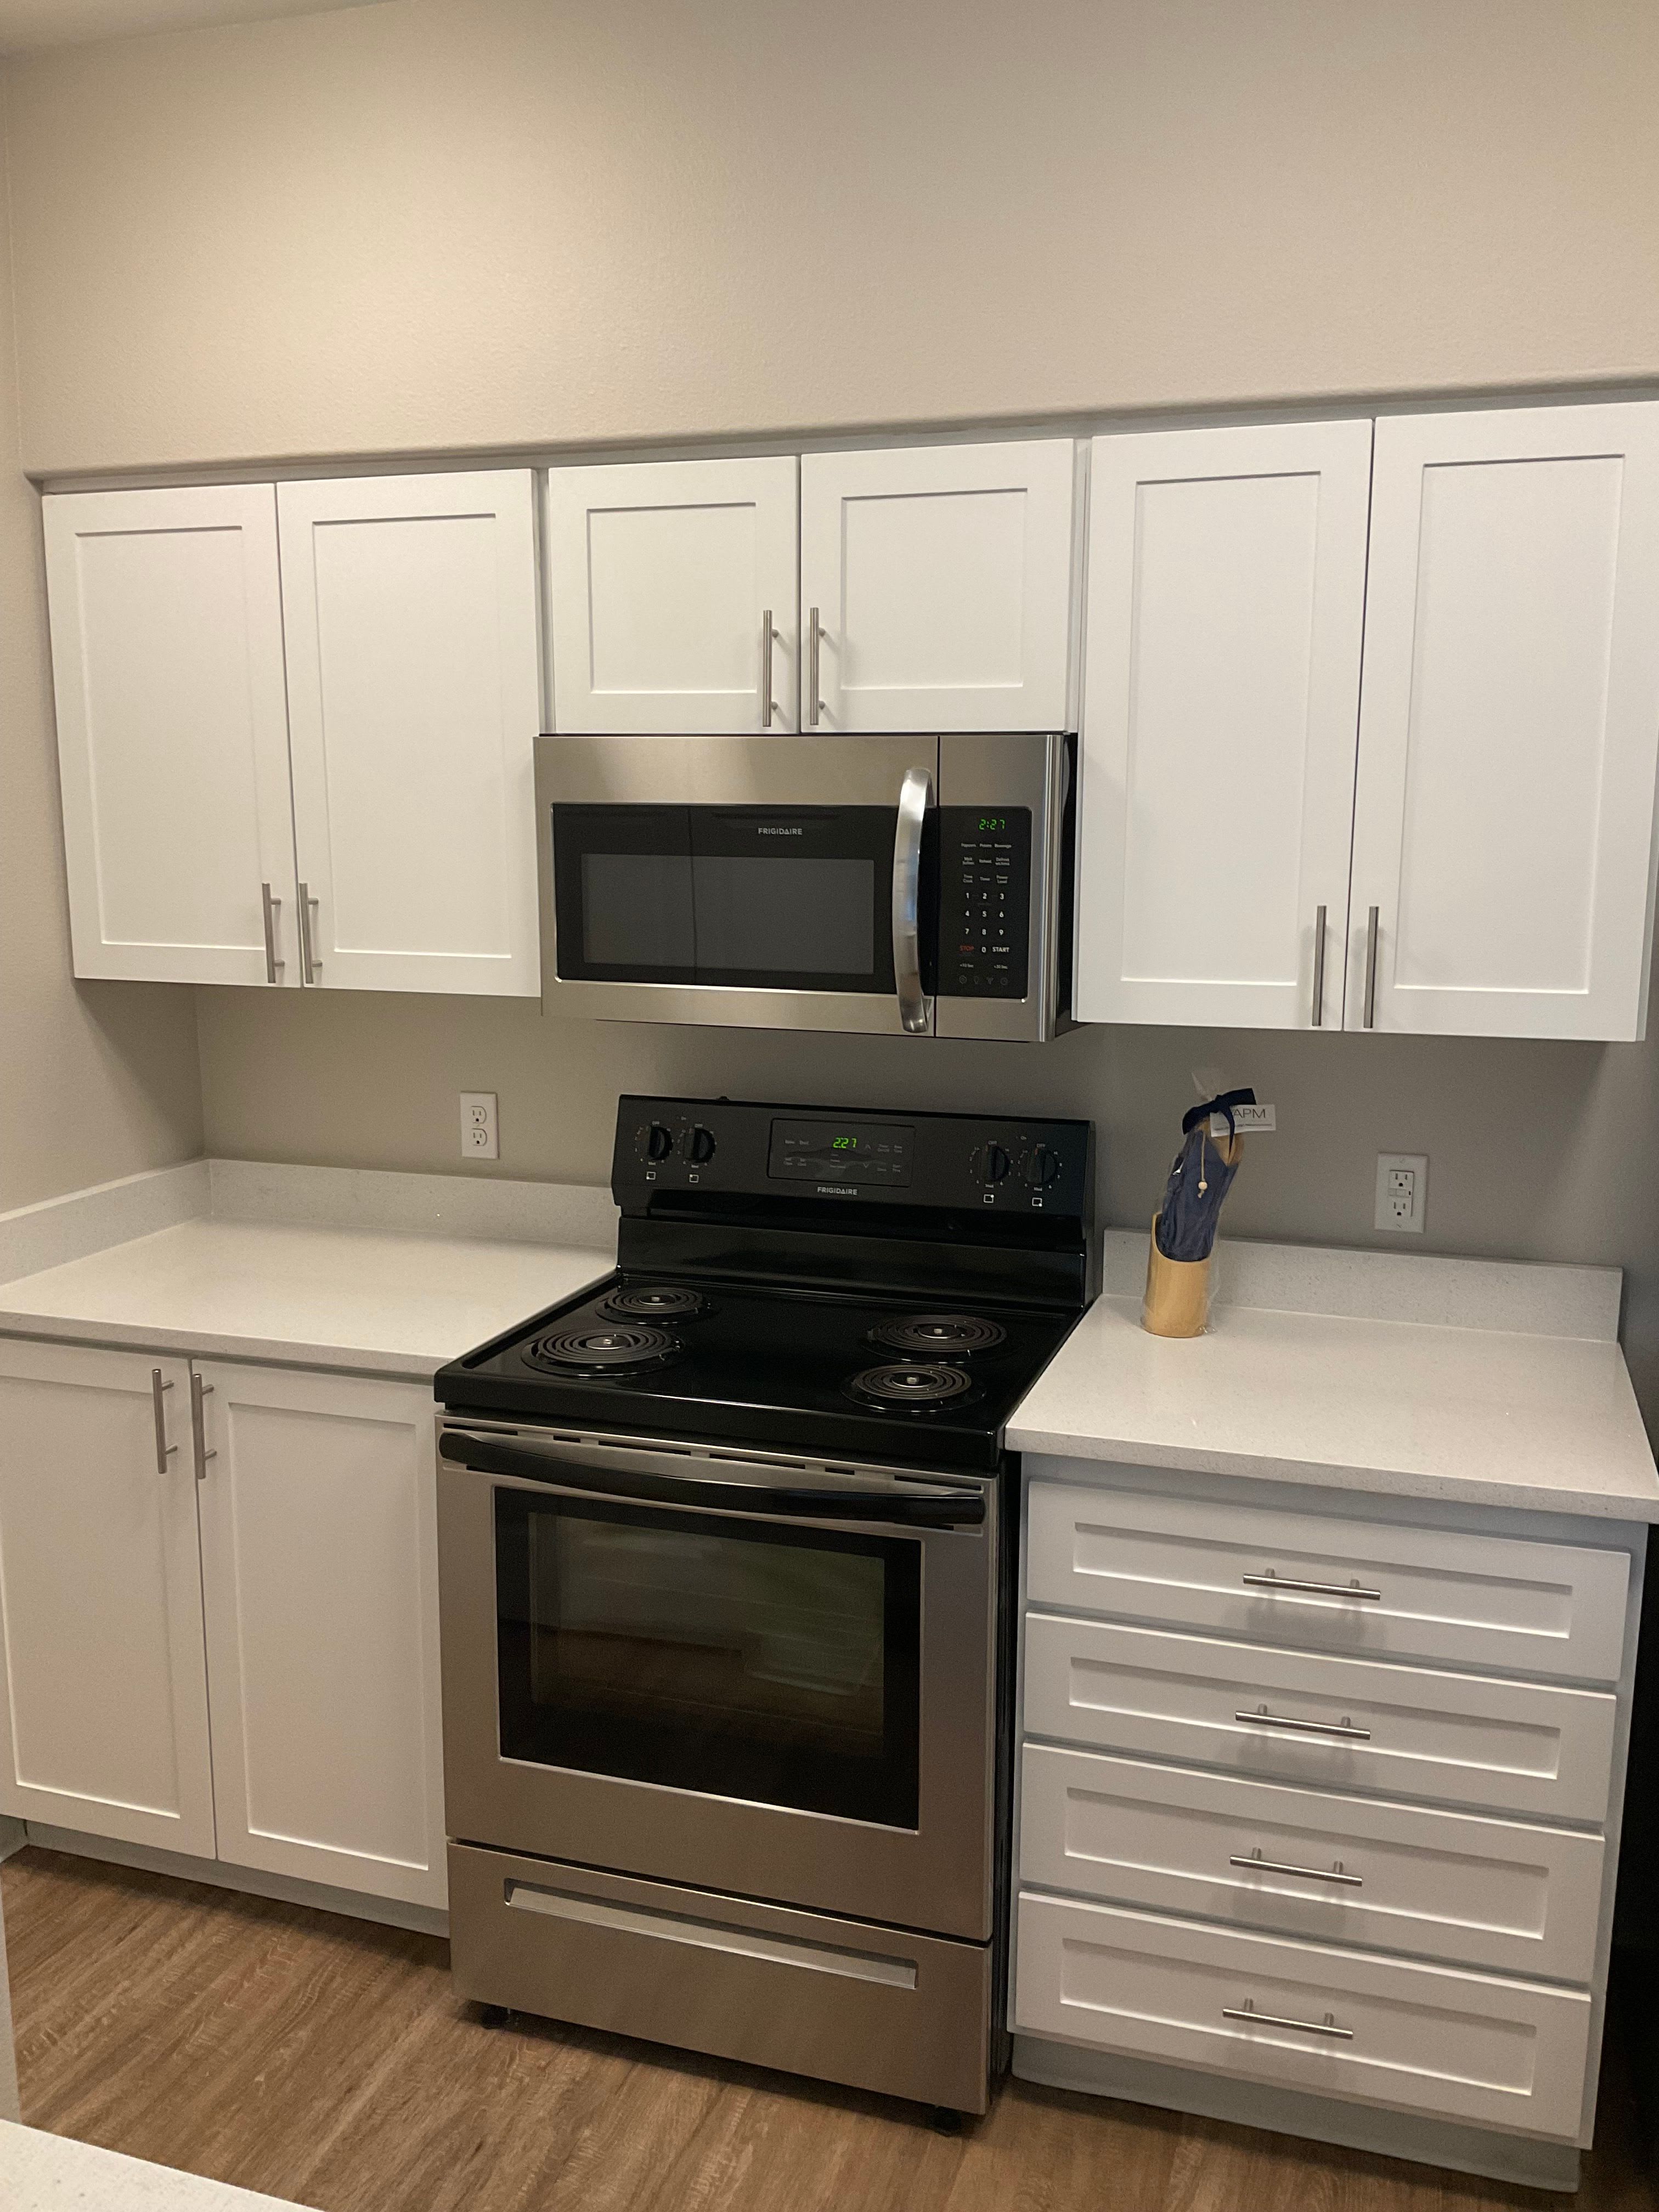 Our Renovated Apartments at Woodland Apartments in Olympia, Washington showcase a Kitchen